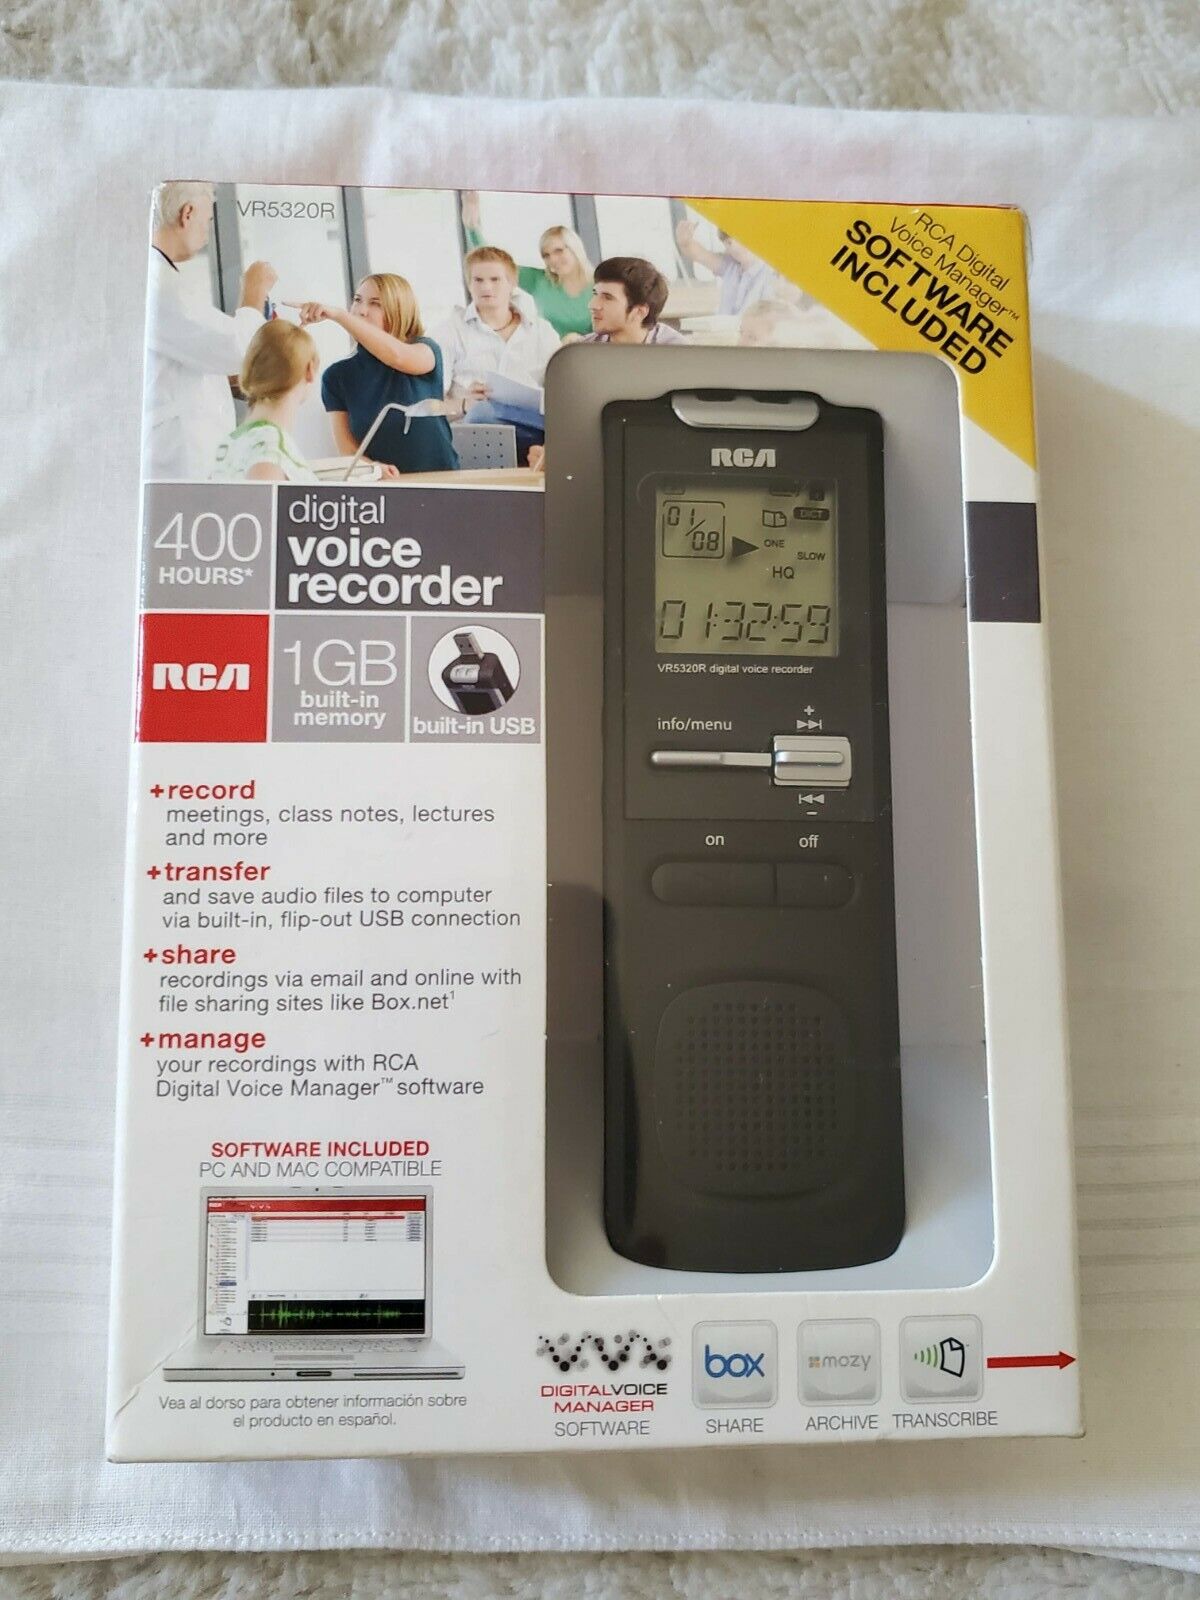 RCA Digital Voice Re-corder 400 Hours 1GB Built In Memory Software Included New